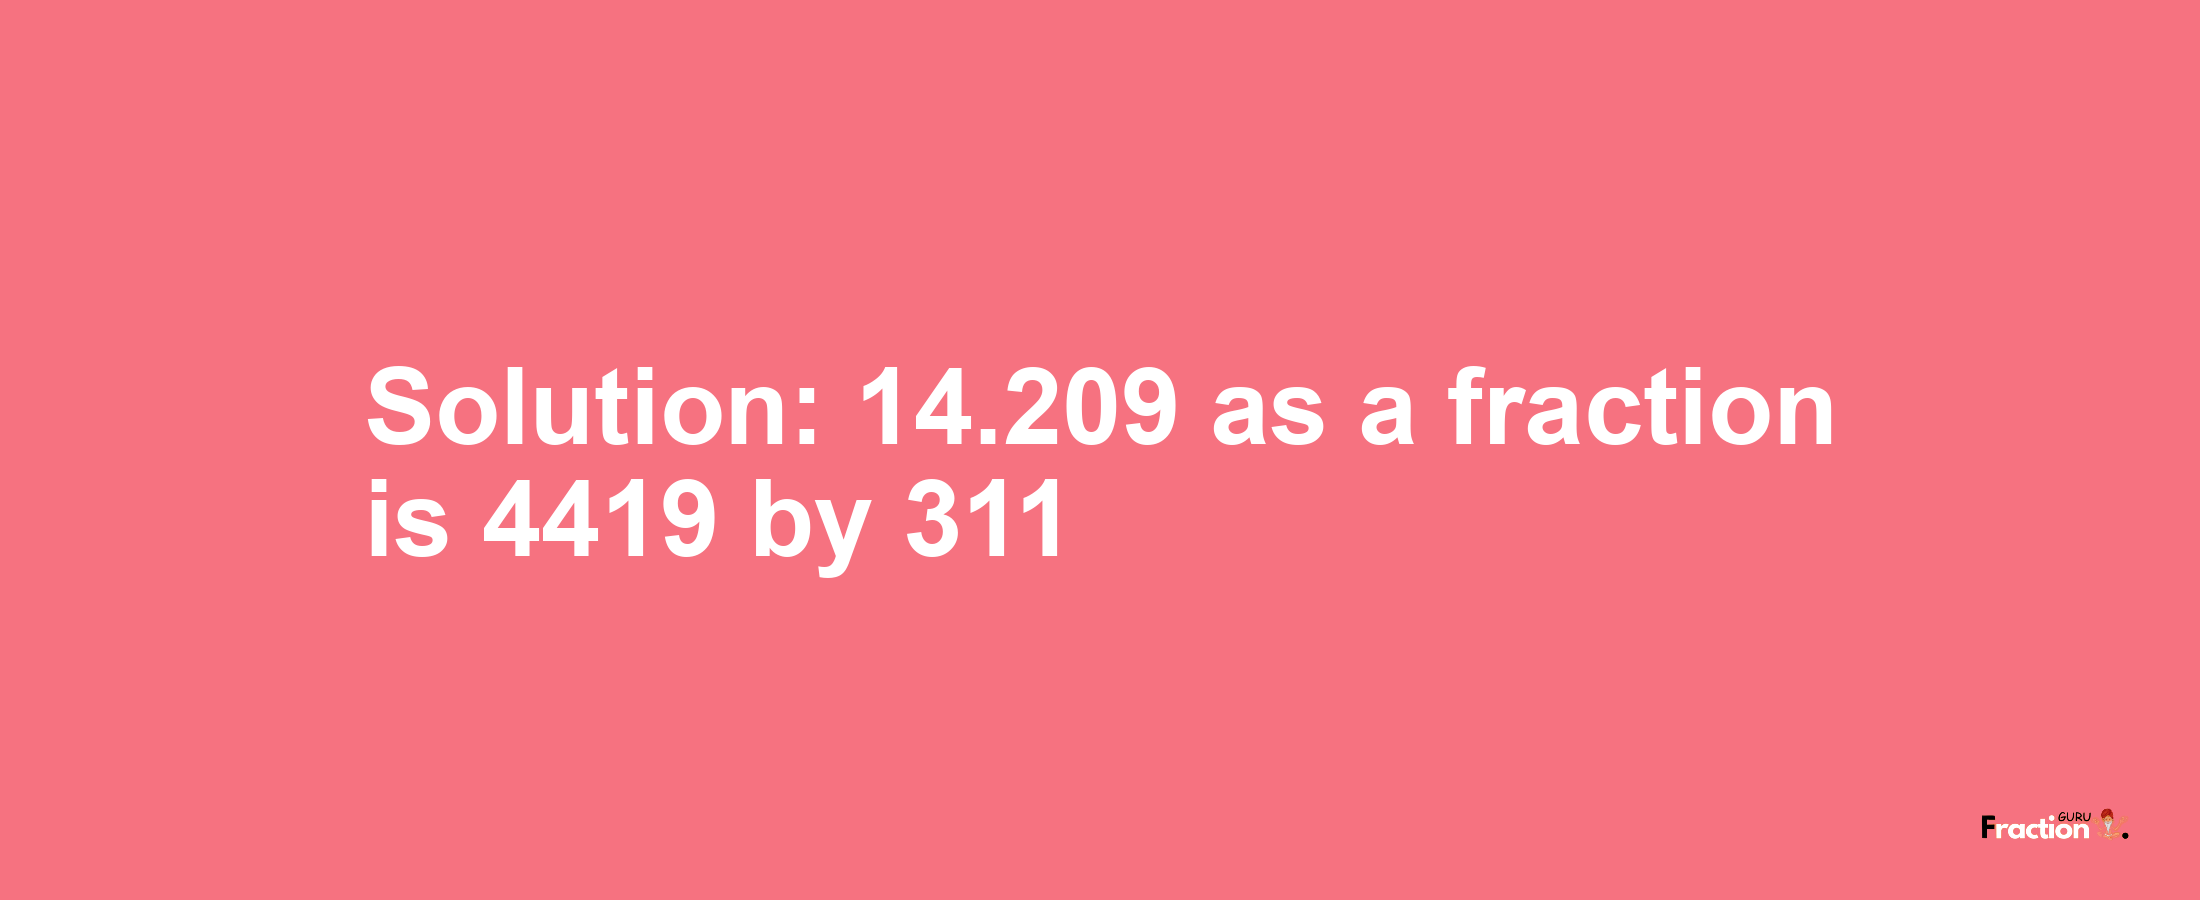 Solution:14.209 as a fraction is 4419/311